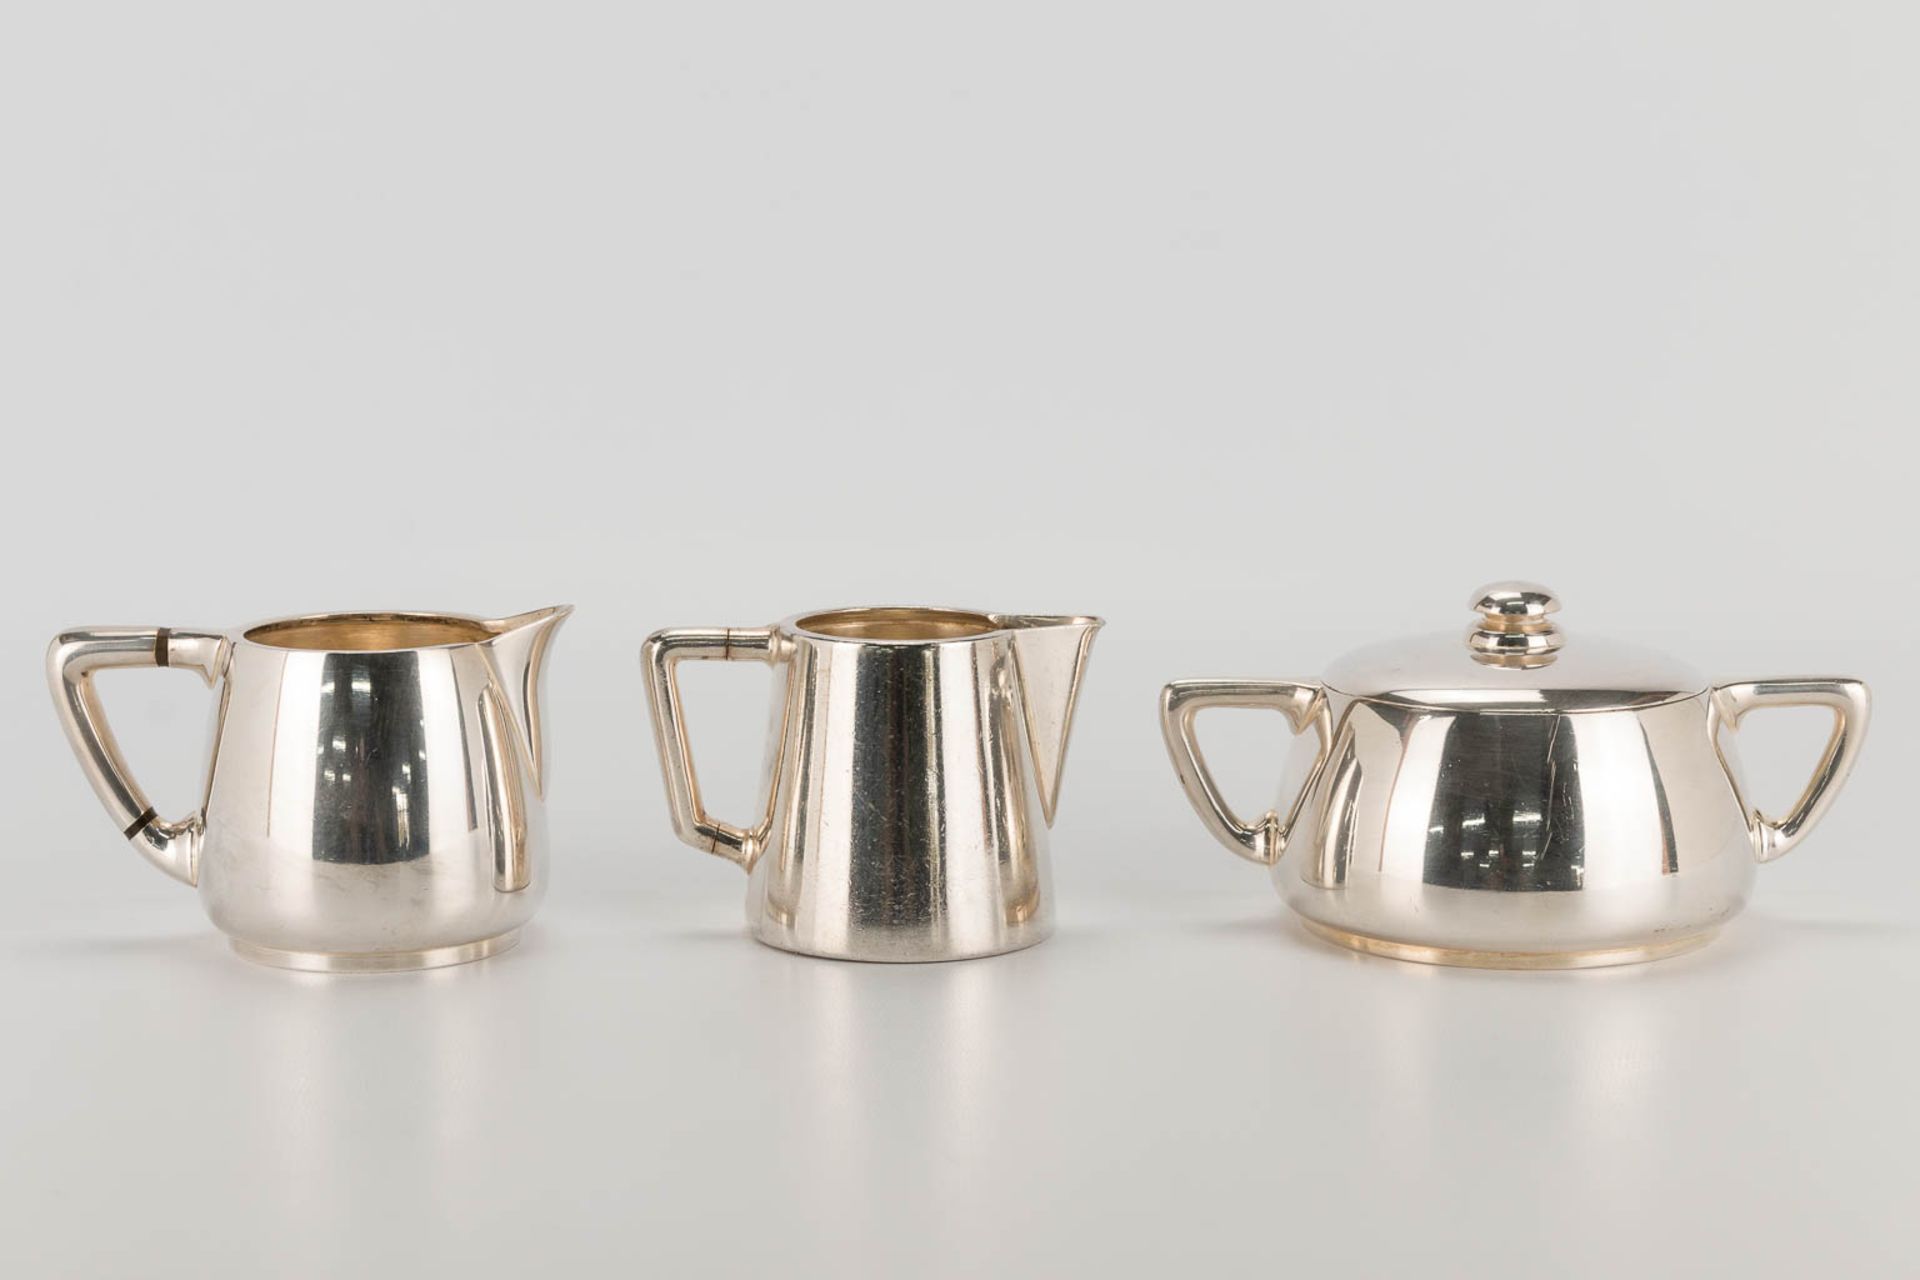 A collection of 4 silver-plated items a champagne bucket, teapot, sugar pot and milk jug made by and - Bild 5 aus 19